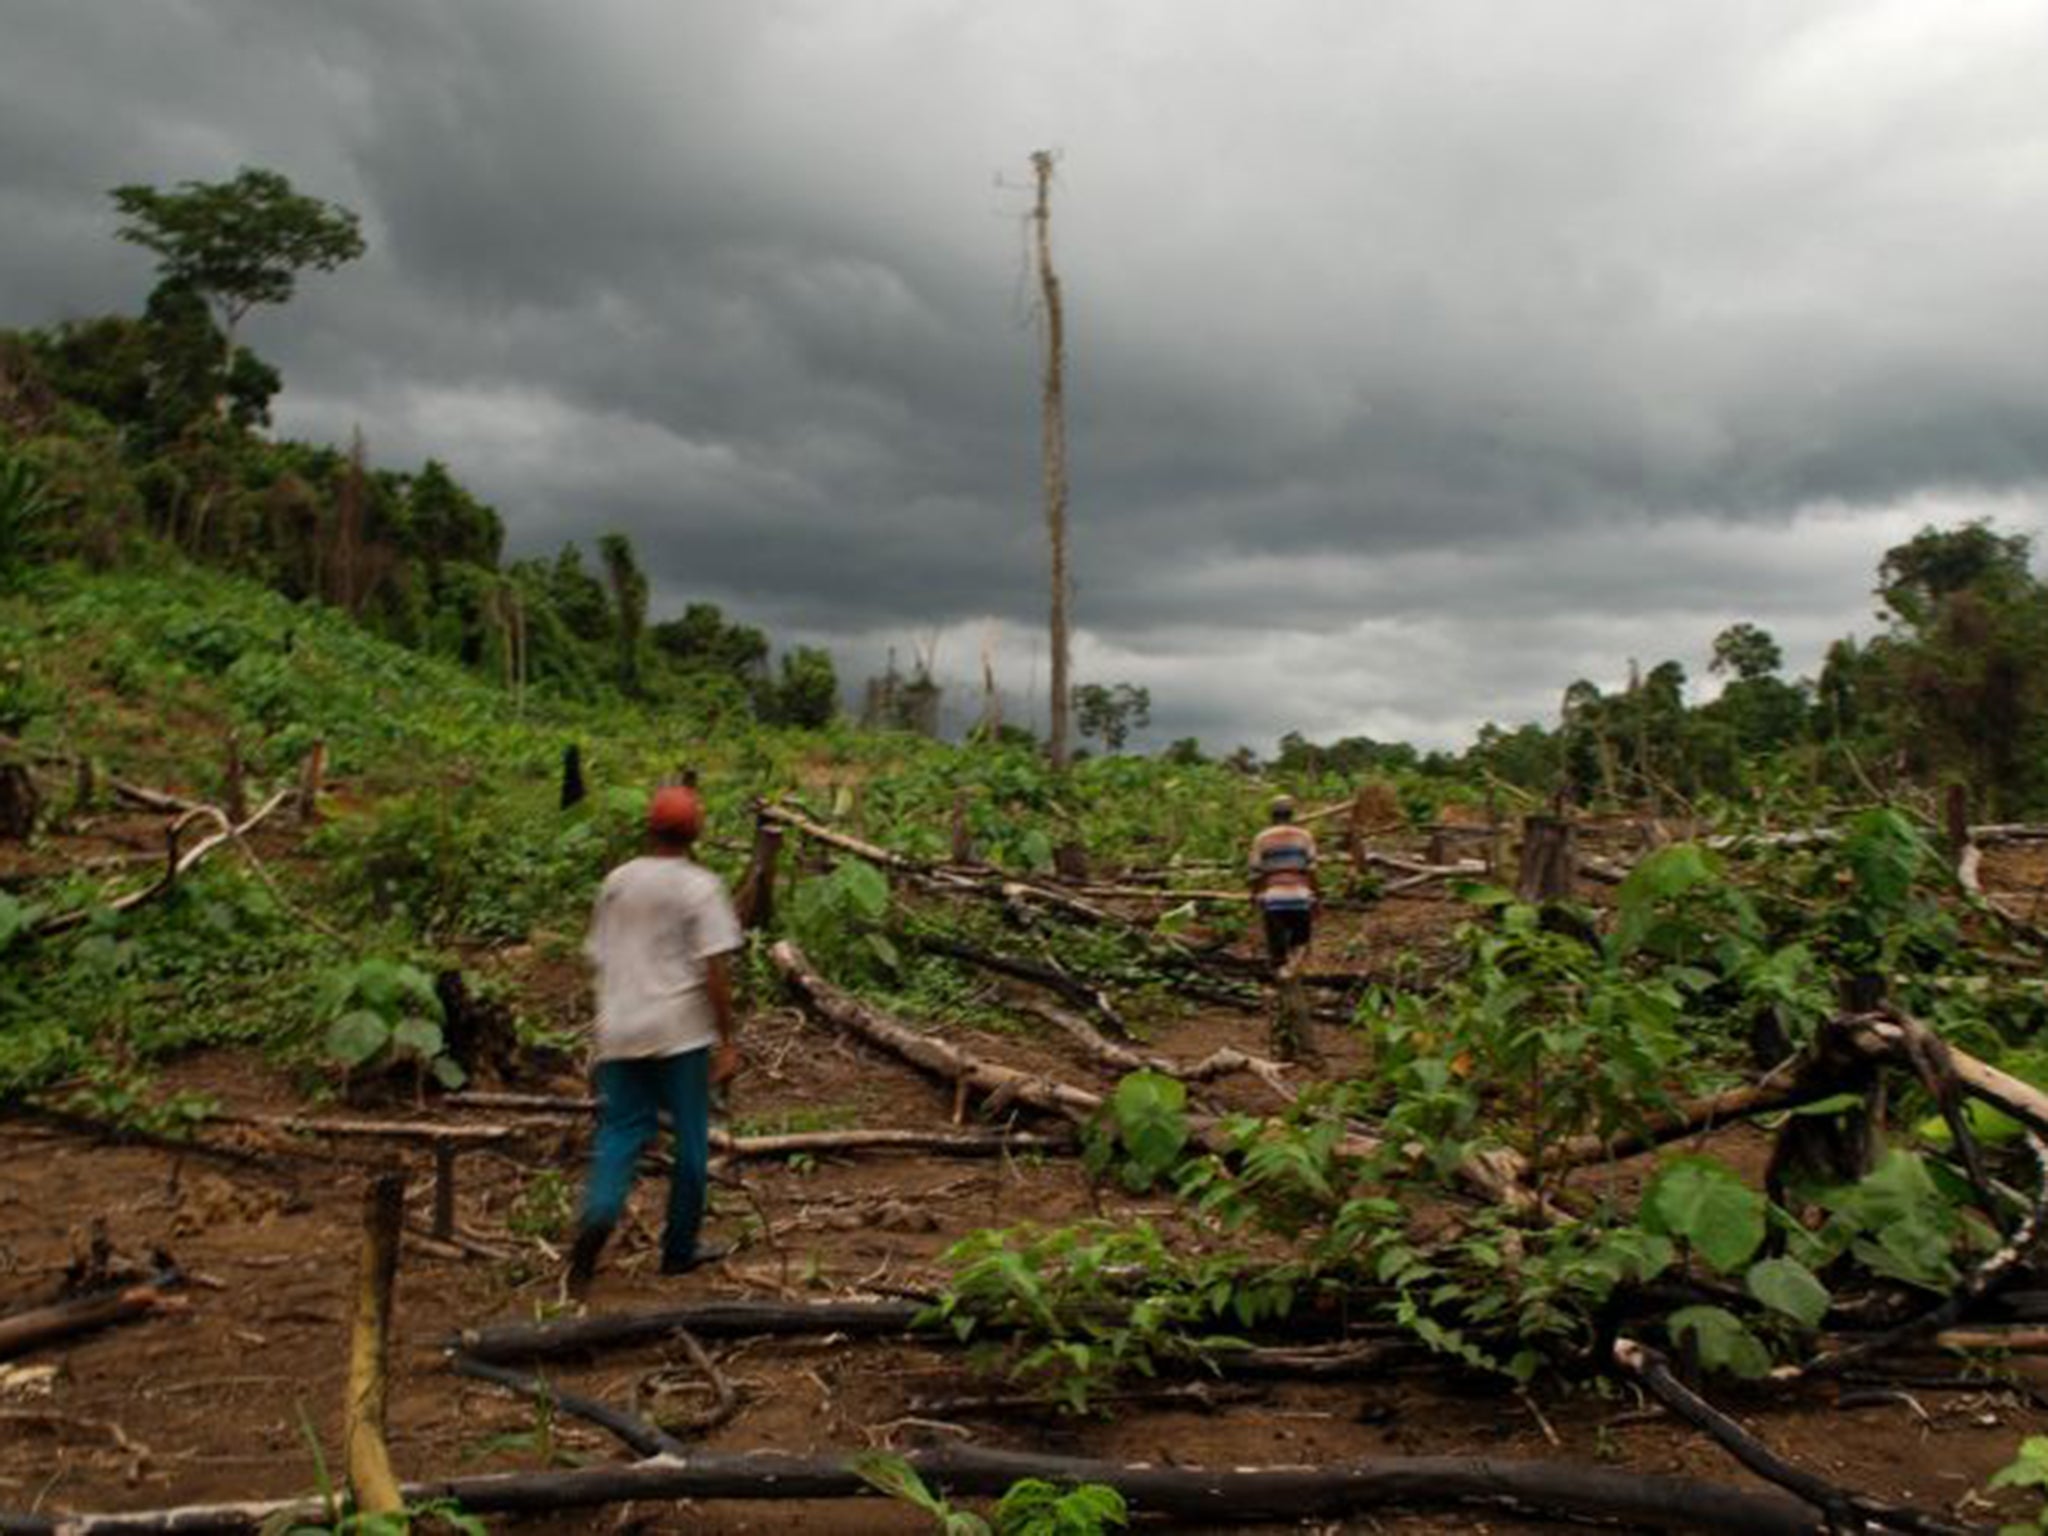 The ban on clearing rainforest comes less than a month after the IoS story